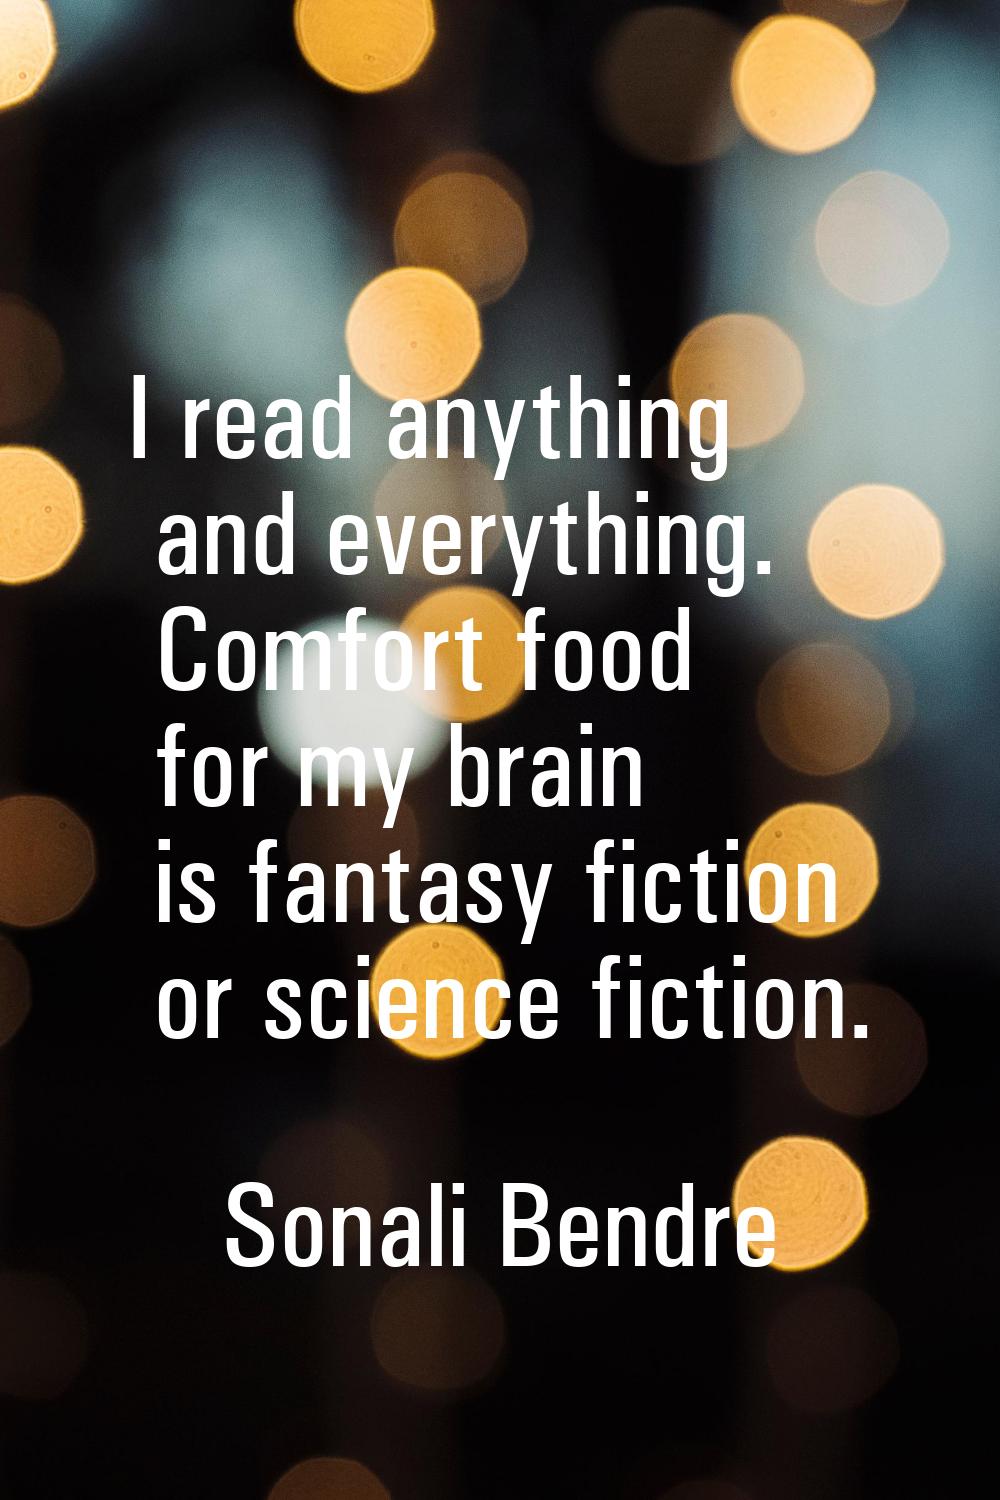 I read anything and everything. Comfort food for my brain is fantasy fiction or science fiction.